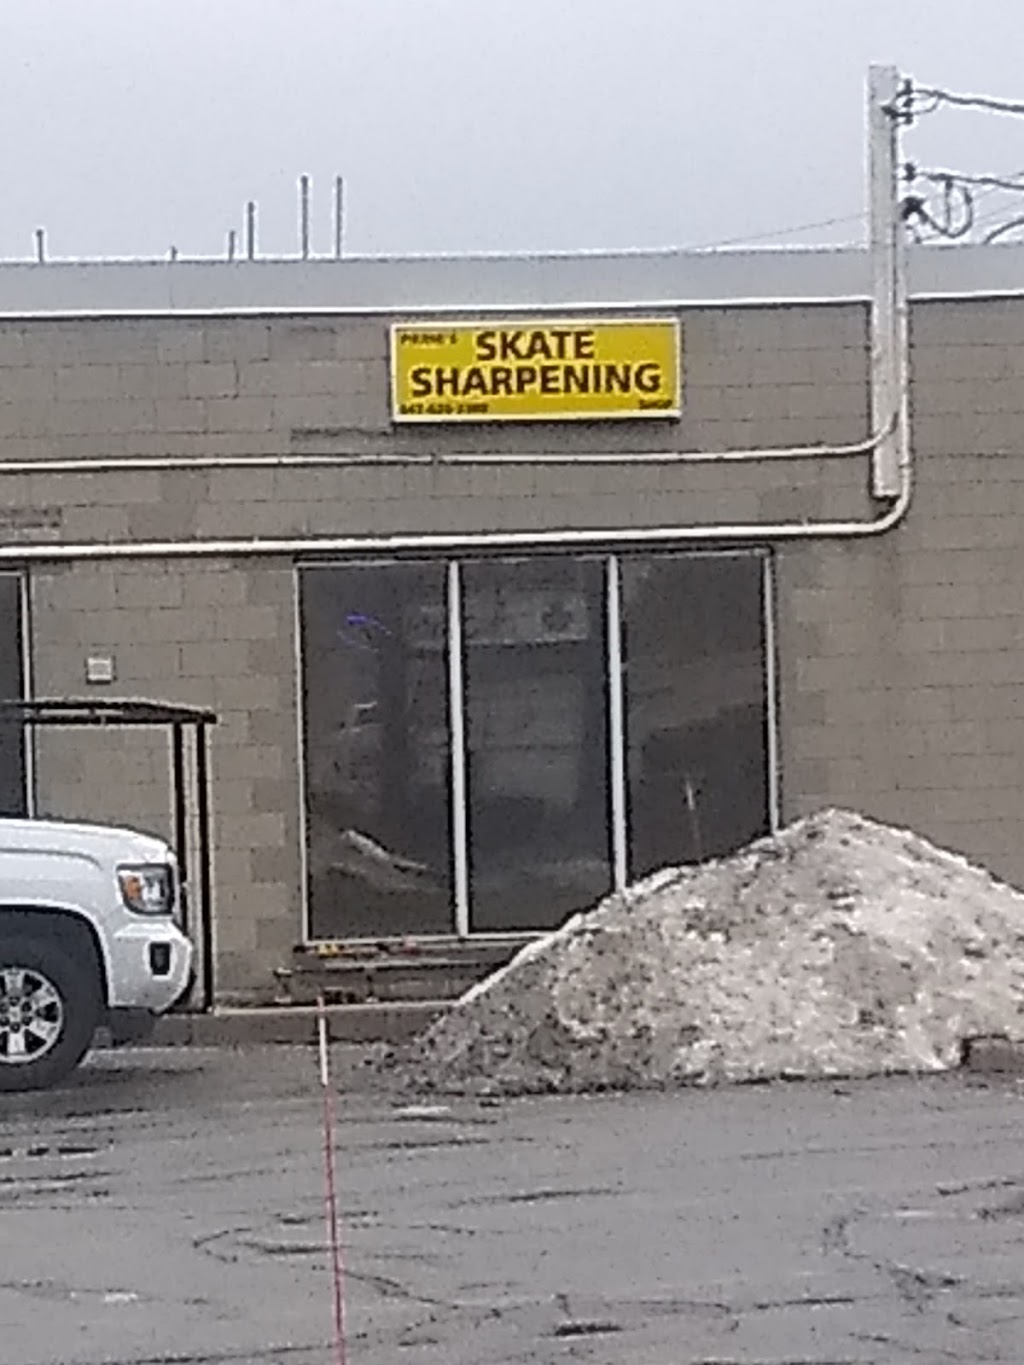 Pierres Skate Sharpening Shop | One building north of arena (Not in arena, 1128 Martin Grove Rd, Etobicoke, ON M9W 4W1, Canada | Phone: (647) 620-3388